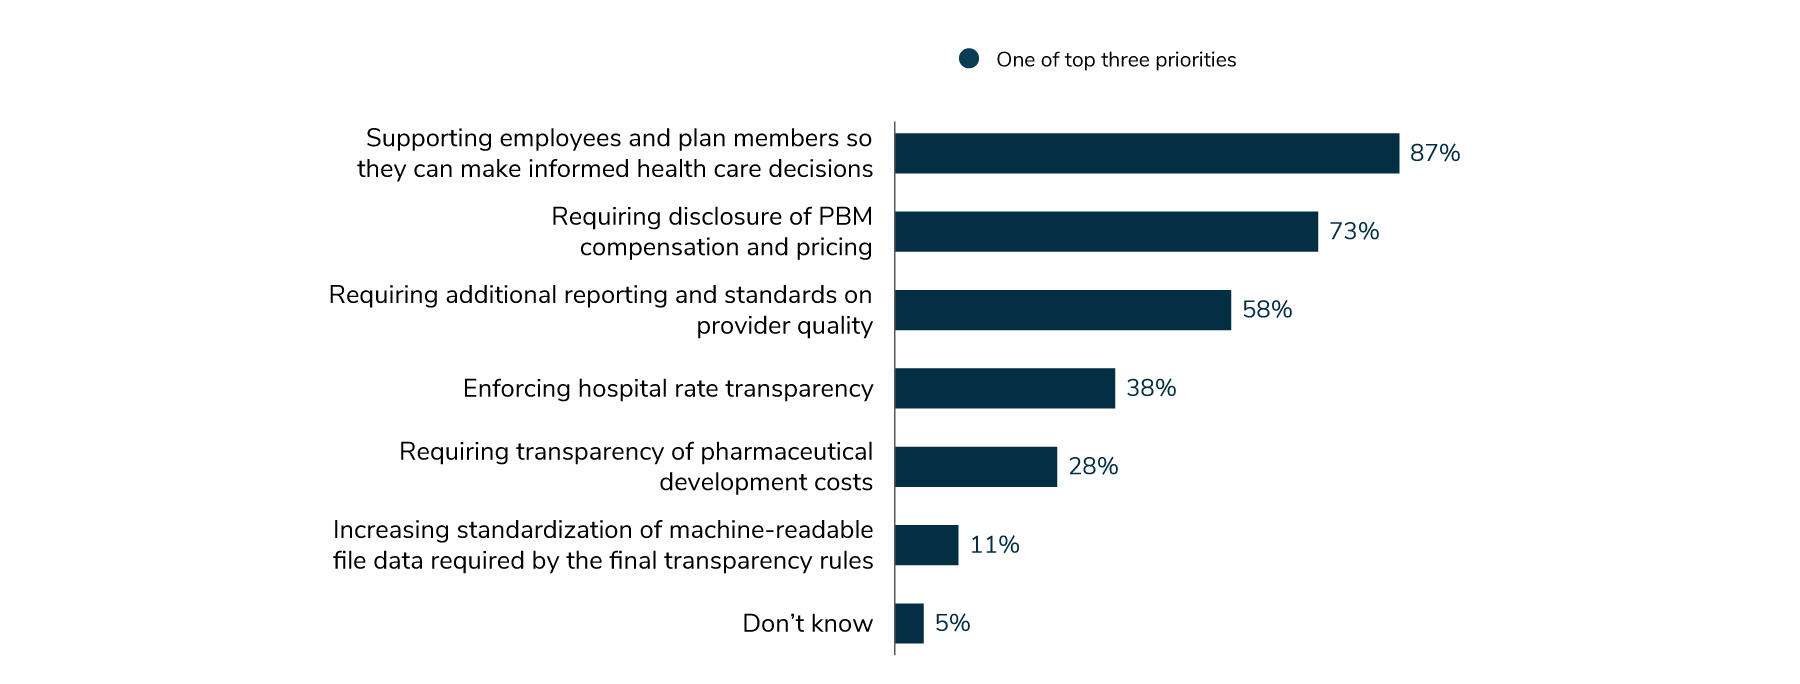 Employers top policy priorities for transparency were supporting employees and plan members so they can make informed health care decisions (selected as one of the top 3 priorities by 87%), requiring disclosure of PBM compensation and pricing (selected by 73% of employers), and requiring additional reporting and standards on provider quality (selected by 58%).